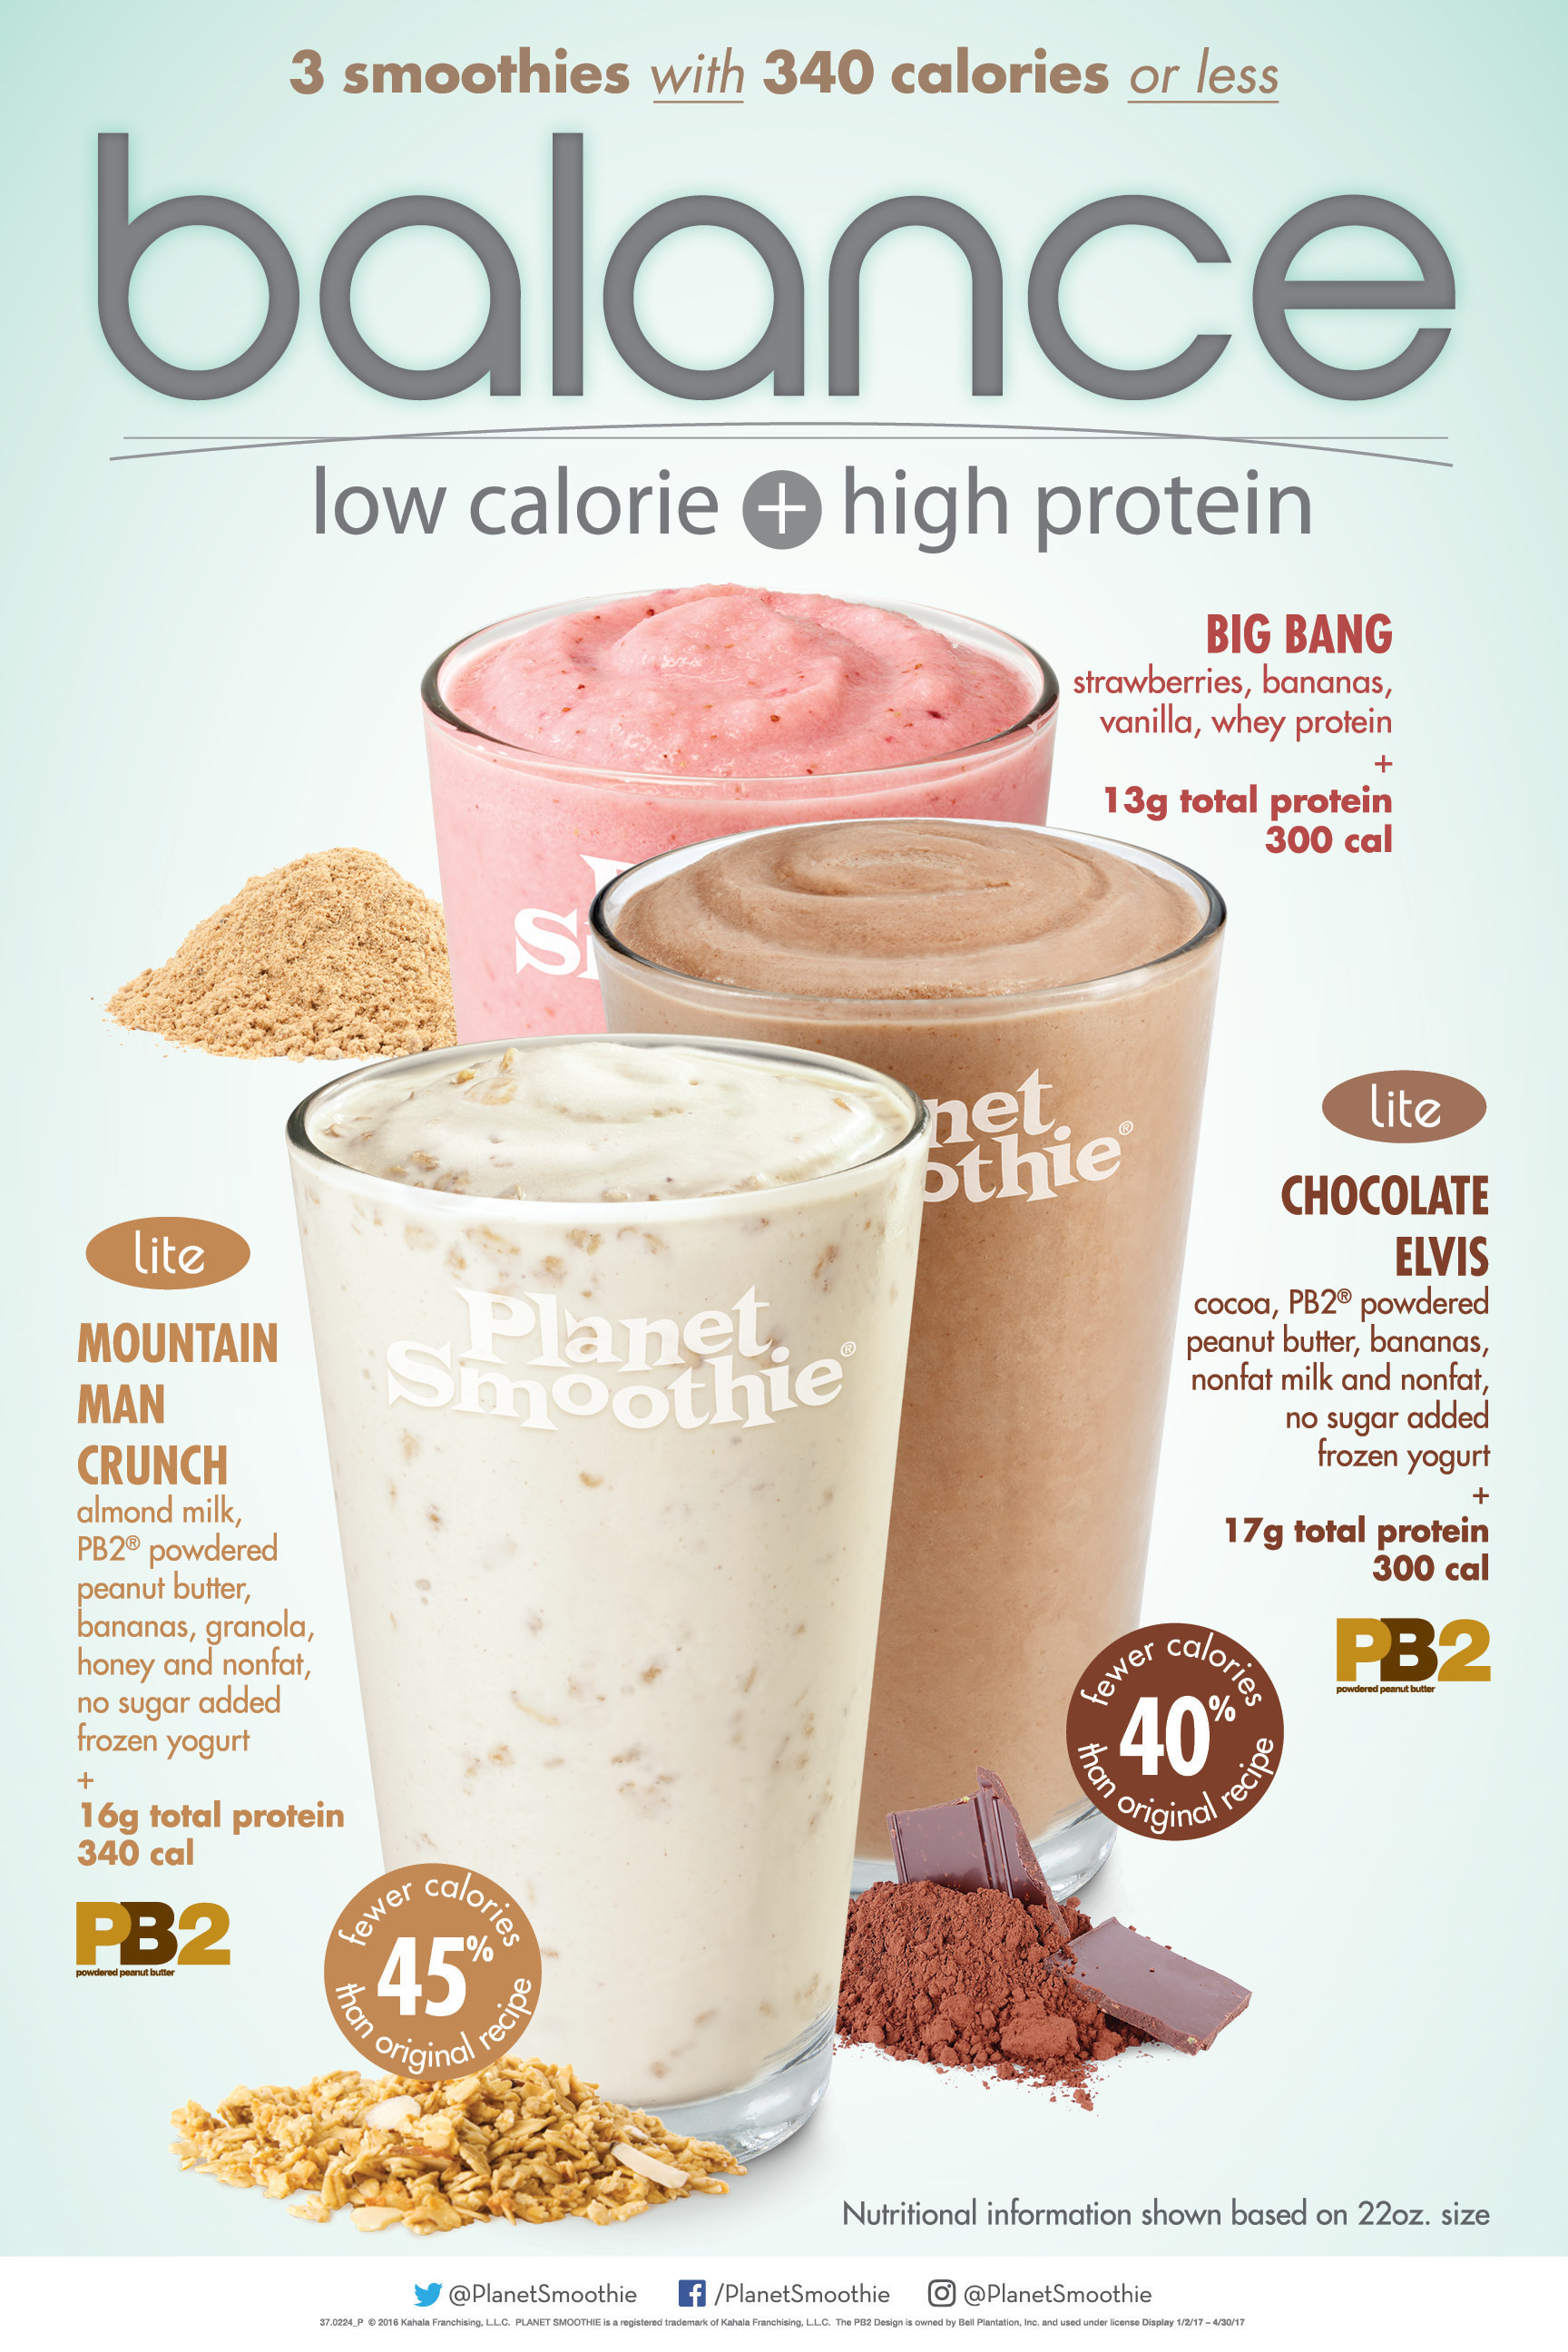 Low Calorie High Protein Smoothies
 Planet Smoothie Features Three Low Calorie High Protein